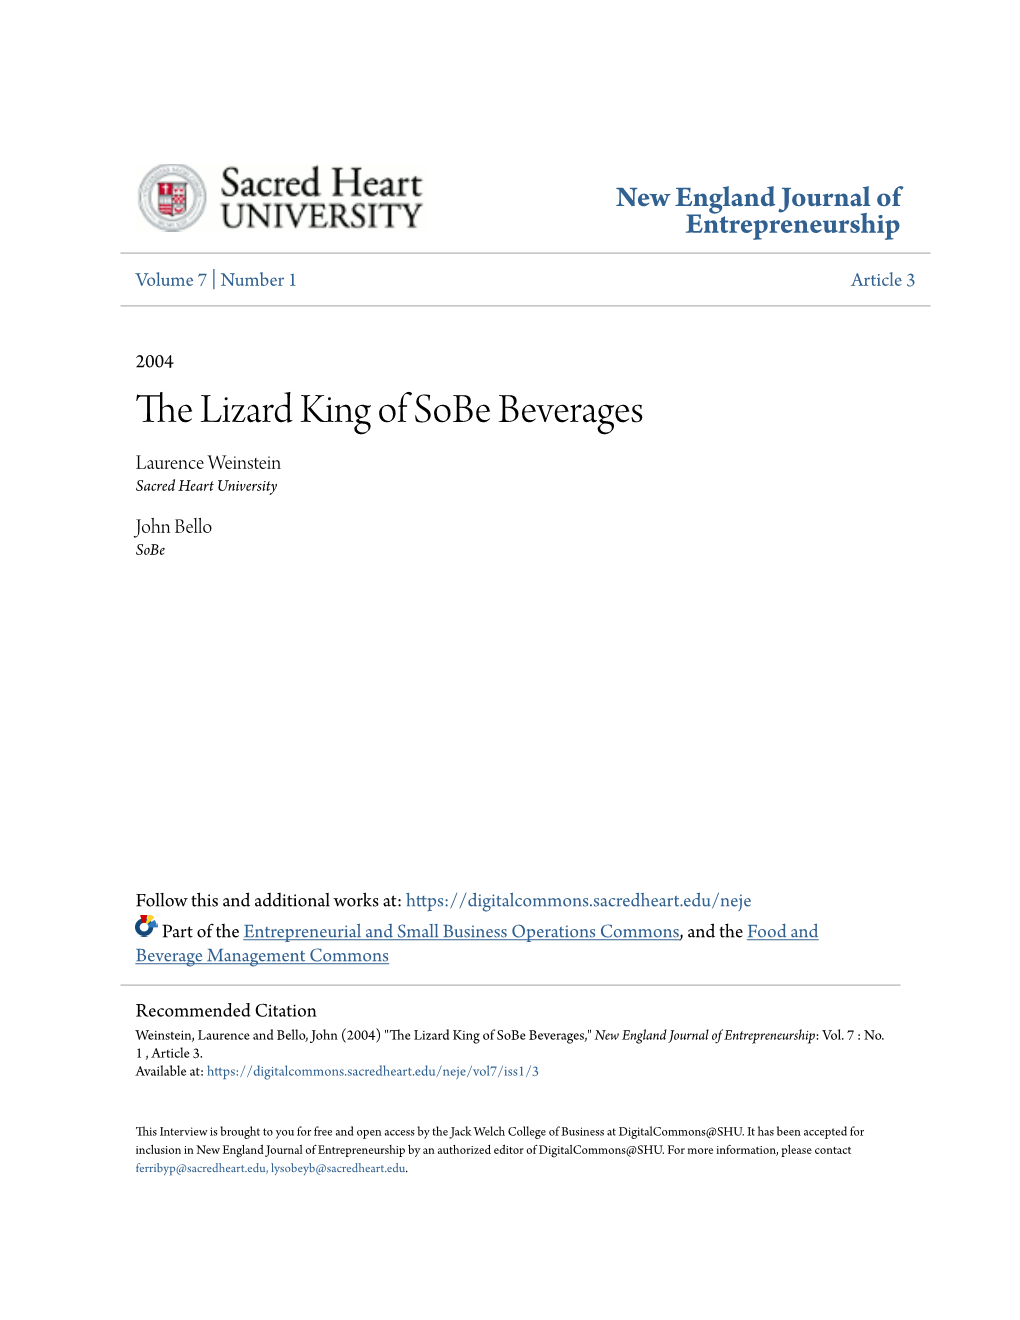 The Lizard King of Sobe Beverages Laurence Weinstein Sacred Heart University